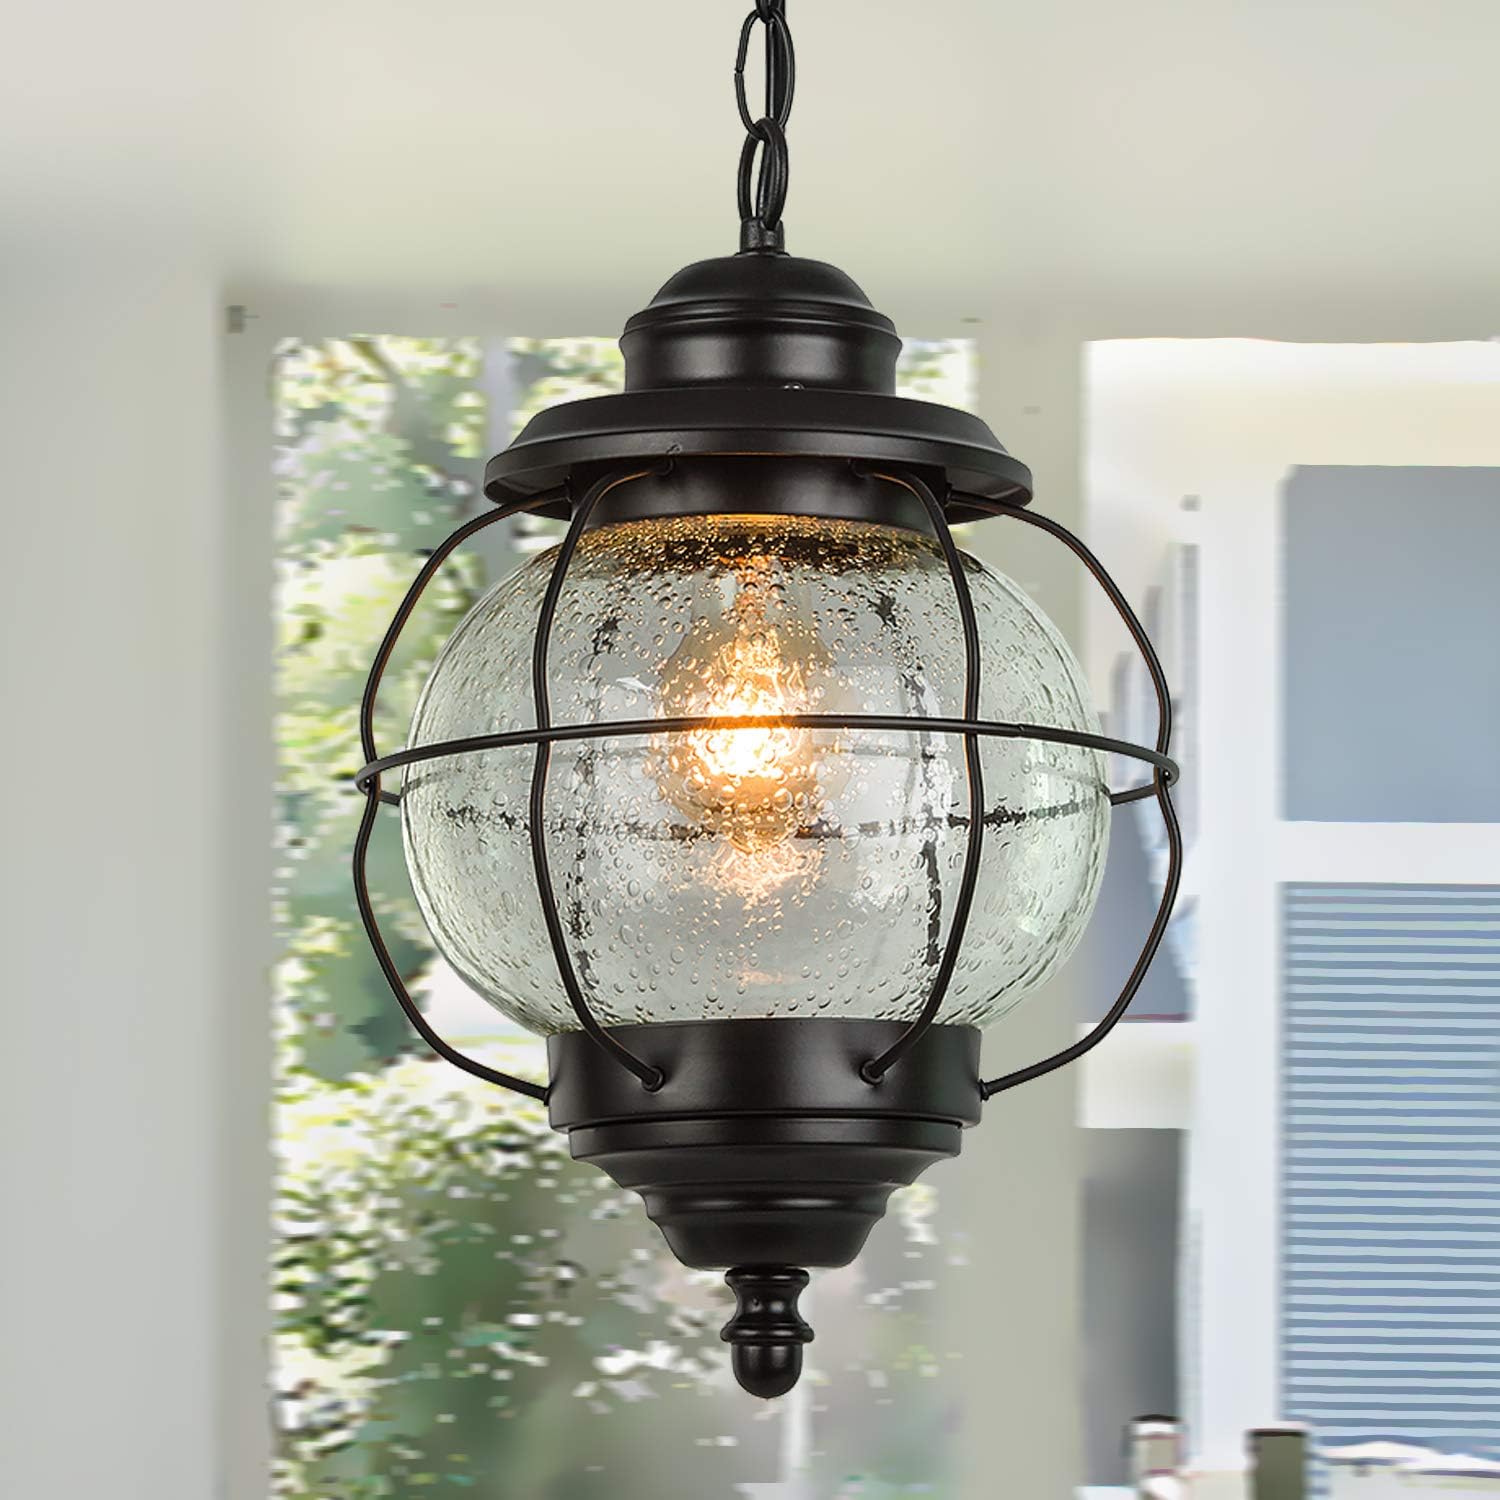 Farmhouse Ceiling Hanging Porch Fixture, Outdoor Clear Globe Light Fixture